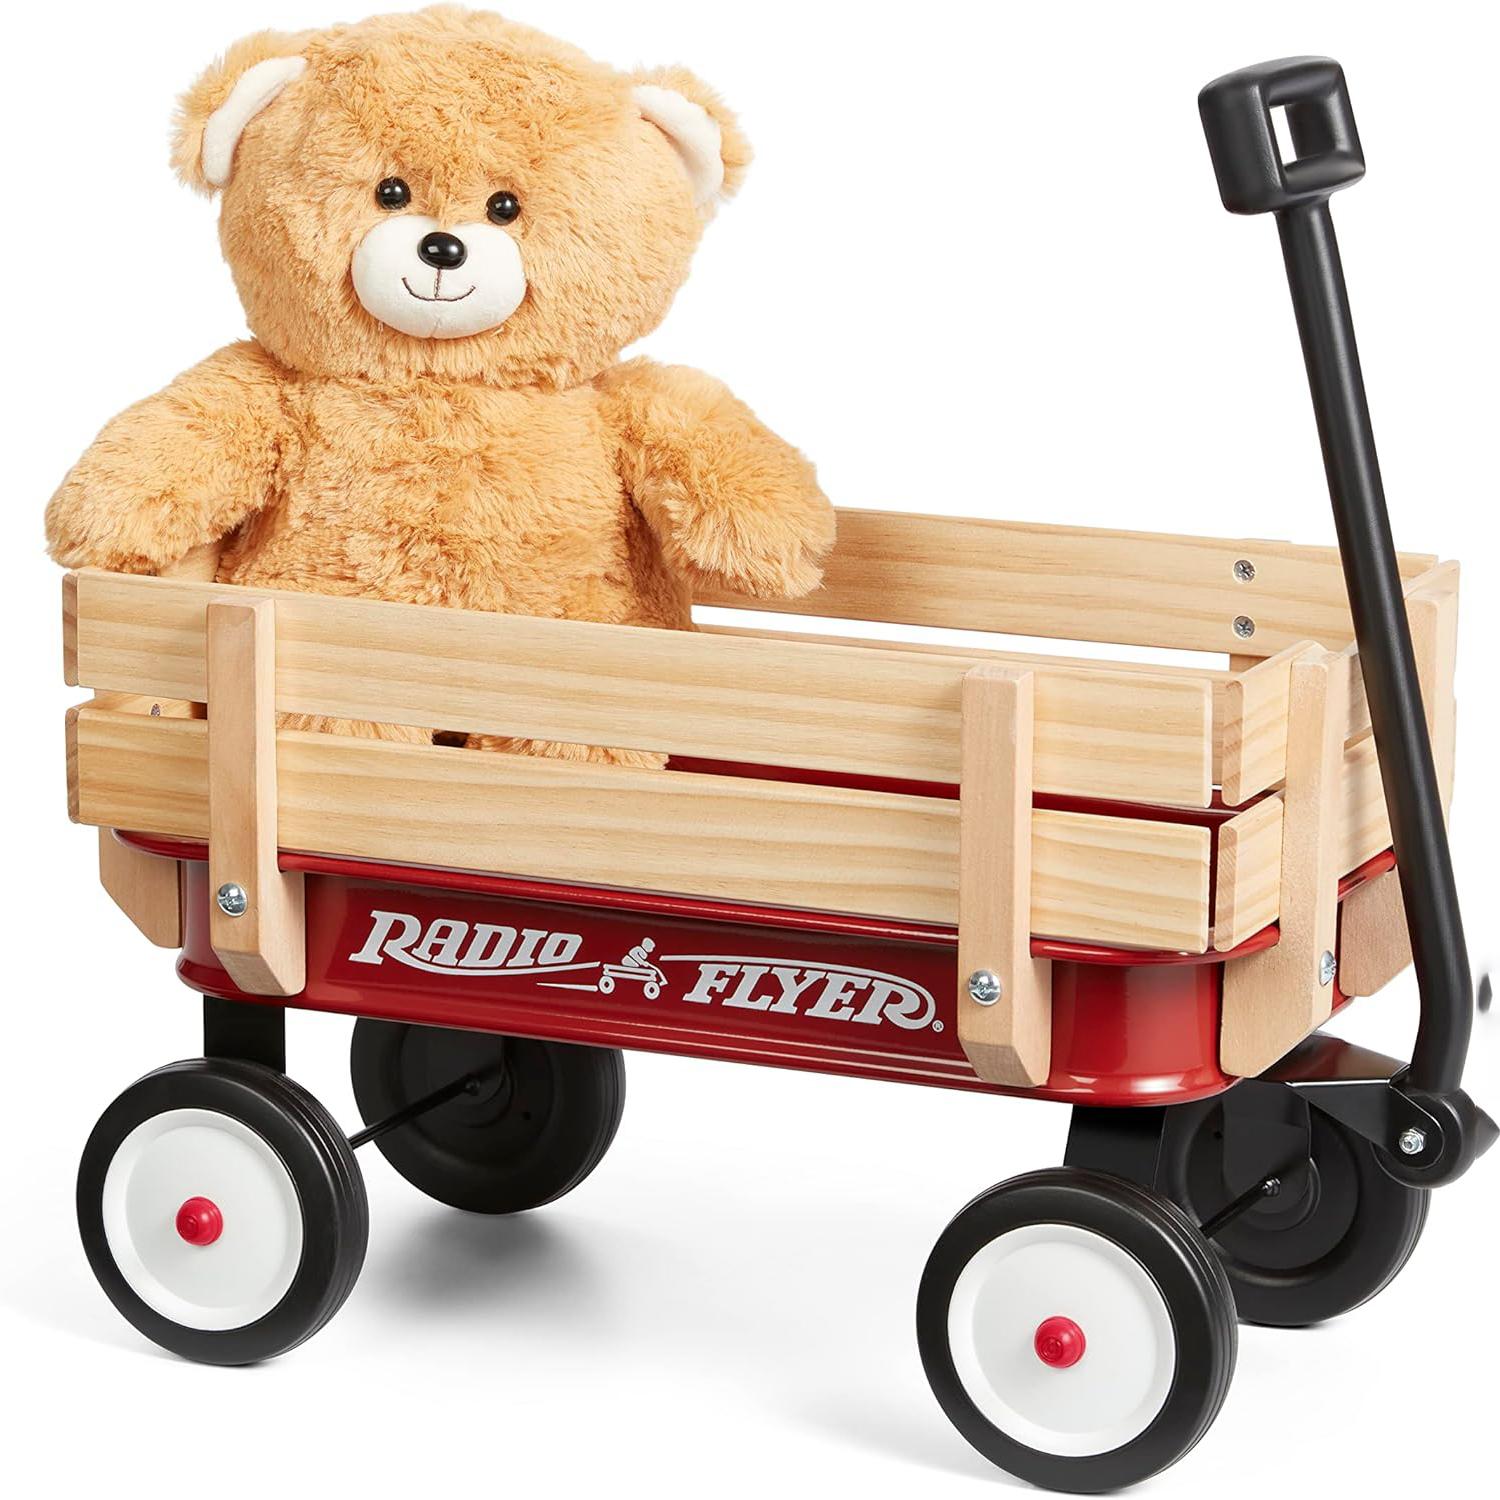 Radio Flyer My 1st Steel and Wood Toy Wagon with Teddy Bear for $32.44